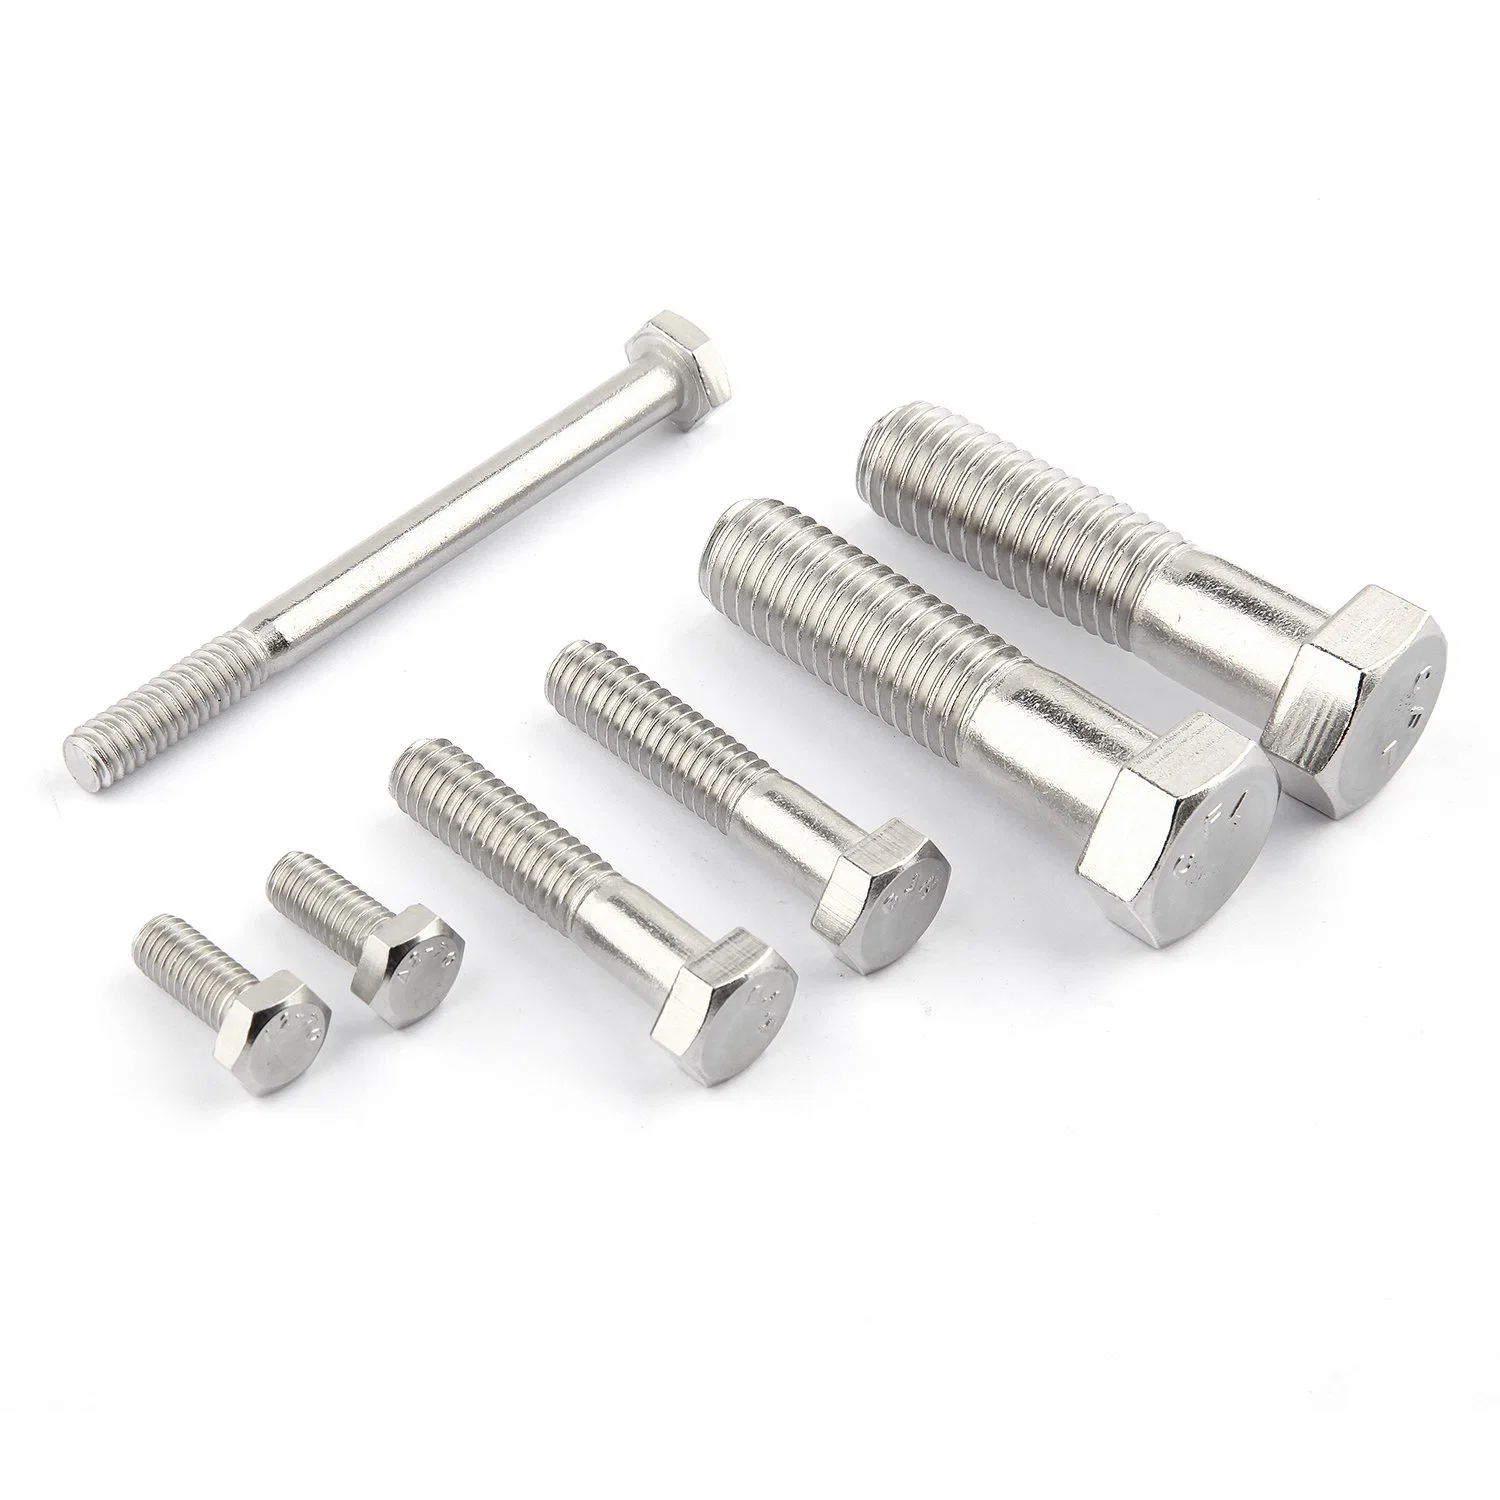 Good Supplier Yalan OEM ODM Bolt and Nut Hex Head Bolt Stainless Steel 304 Carbon Steel